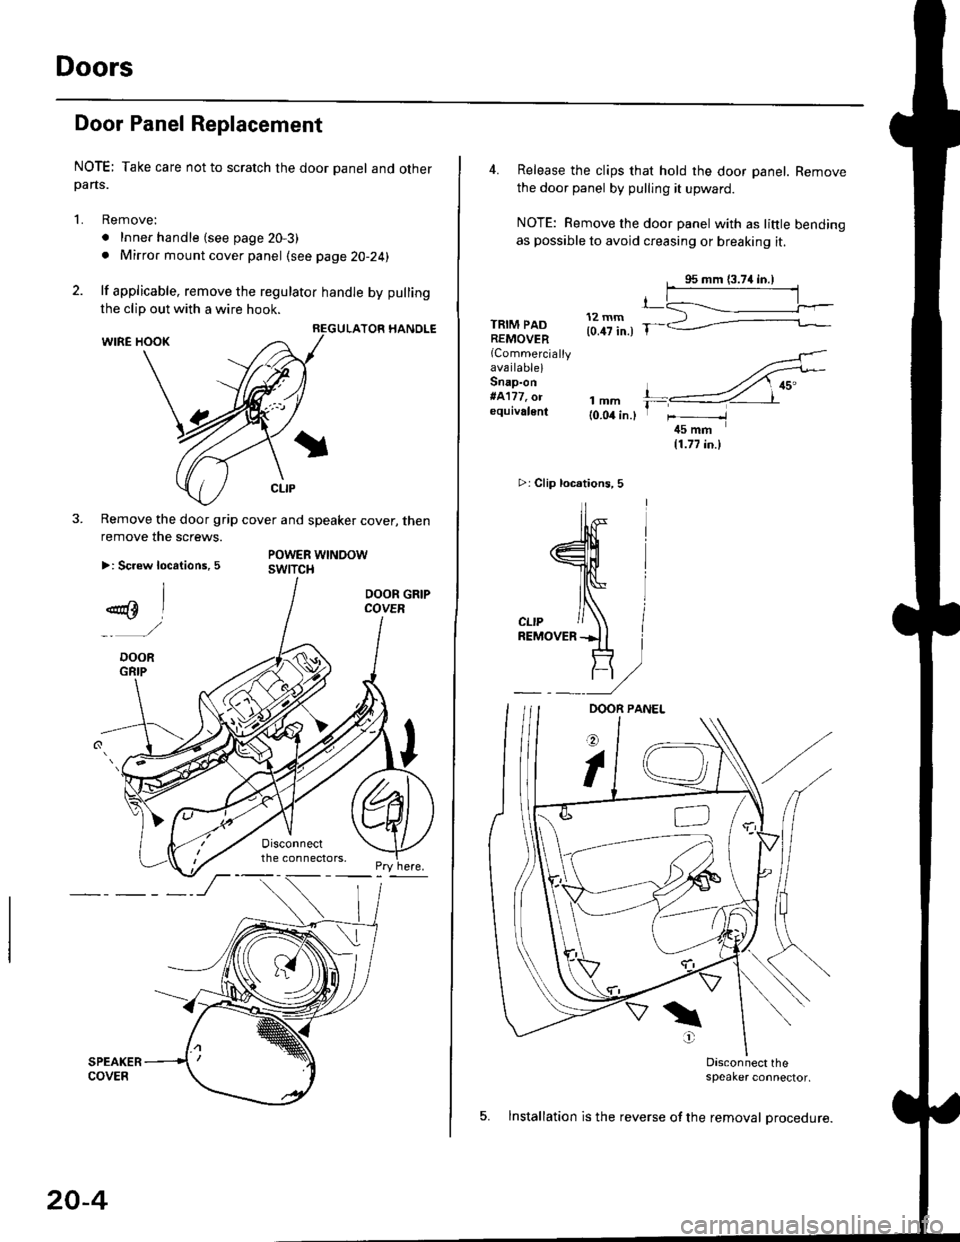 HONDA CIVIC 1999 6.G Workshop Manual Doors
Door Panel Replacement
NOTE; Take care not to scratch the door panel and otherpans.
1. Remove:
. Inner handle (see page 20-3)
. Mirror mount cover panel (see page 20-24)
2. lf applicable, remove